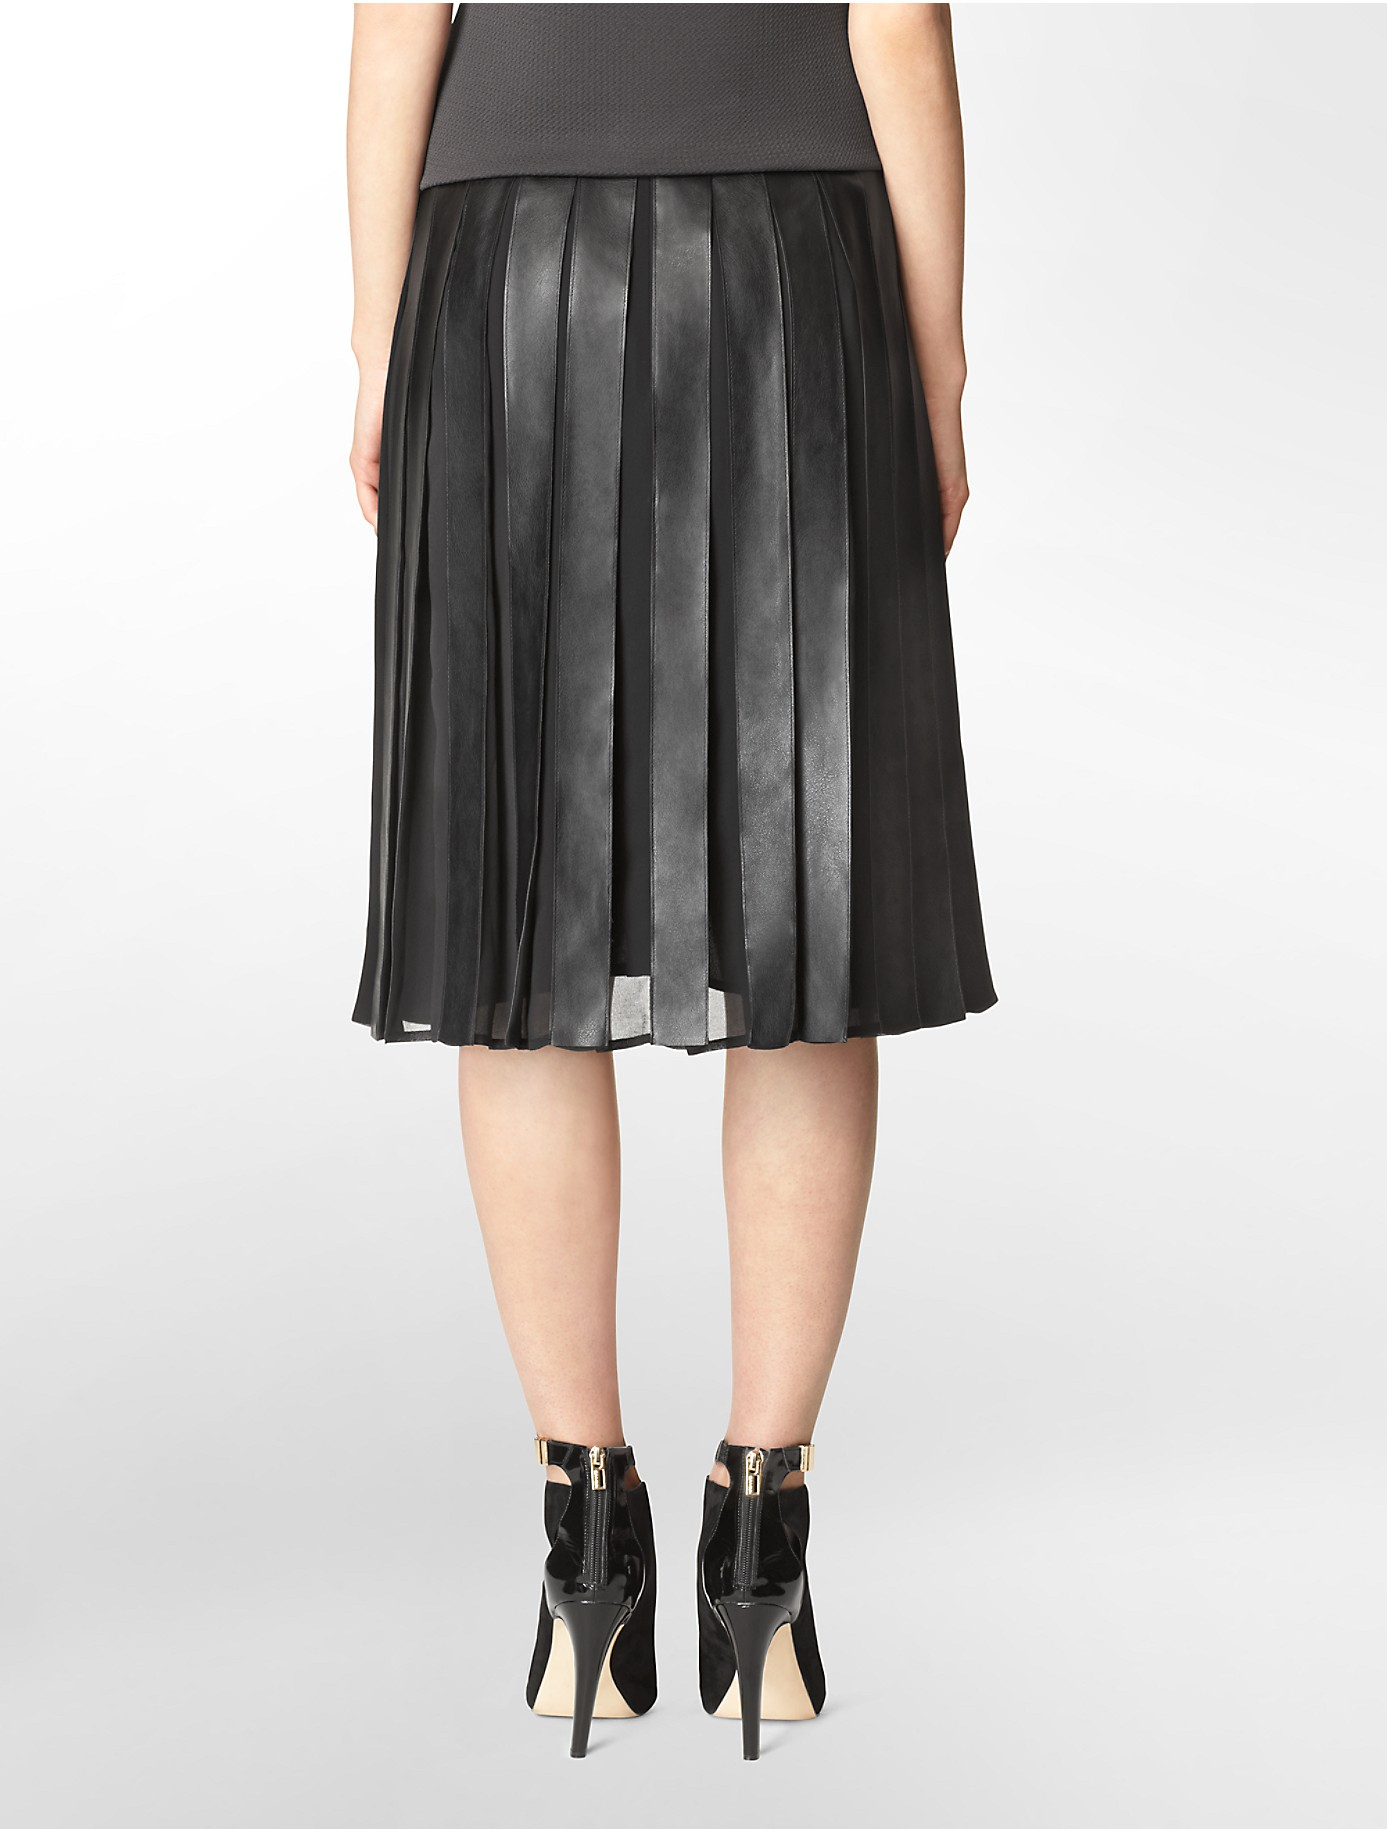 Calvin klein White Label Faux Leather + Chiffon Pleated Skirt in Black ...